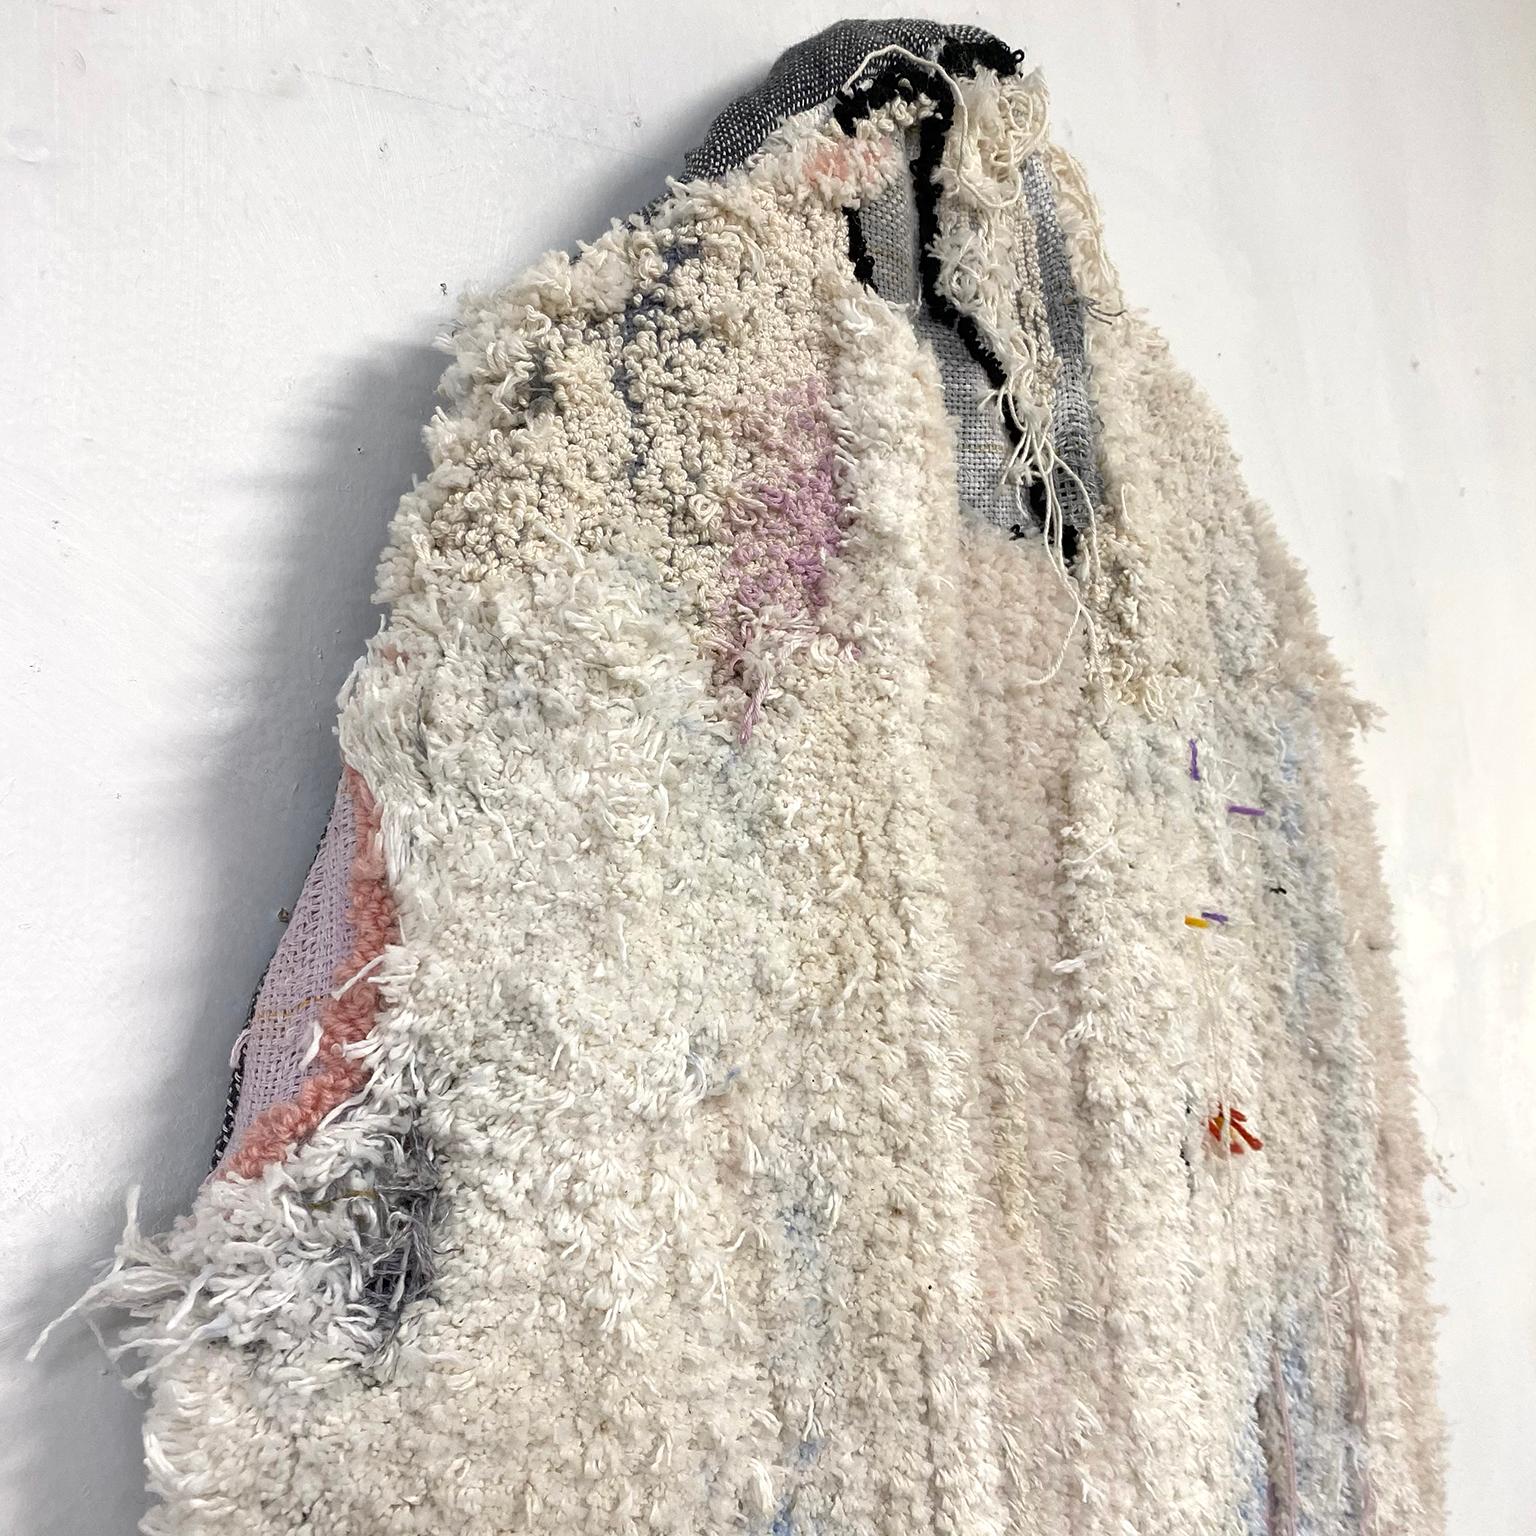 Judy Rushin-Knopf (1959) was born in Dallas Texas and lives in Tallahasee, FL. Her work addresses bodies, access, and connection. She has exhibited her paintings, sculptures, and textiles in museums and galleries across the US, including The